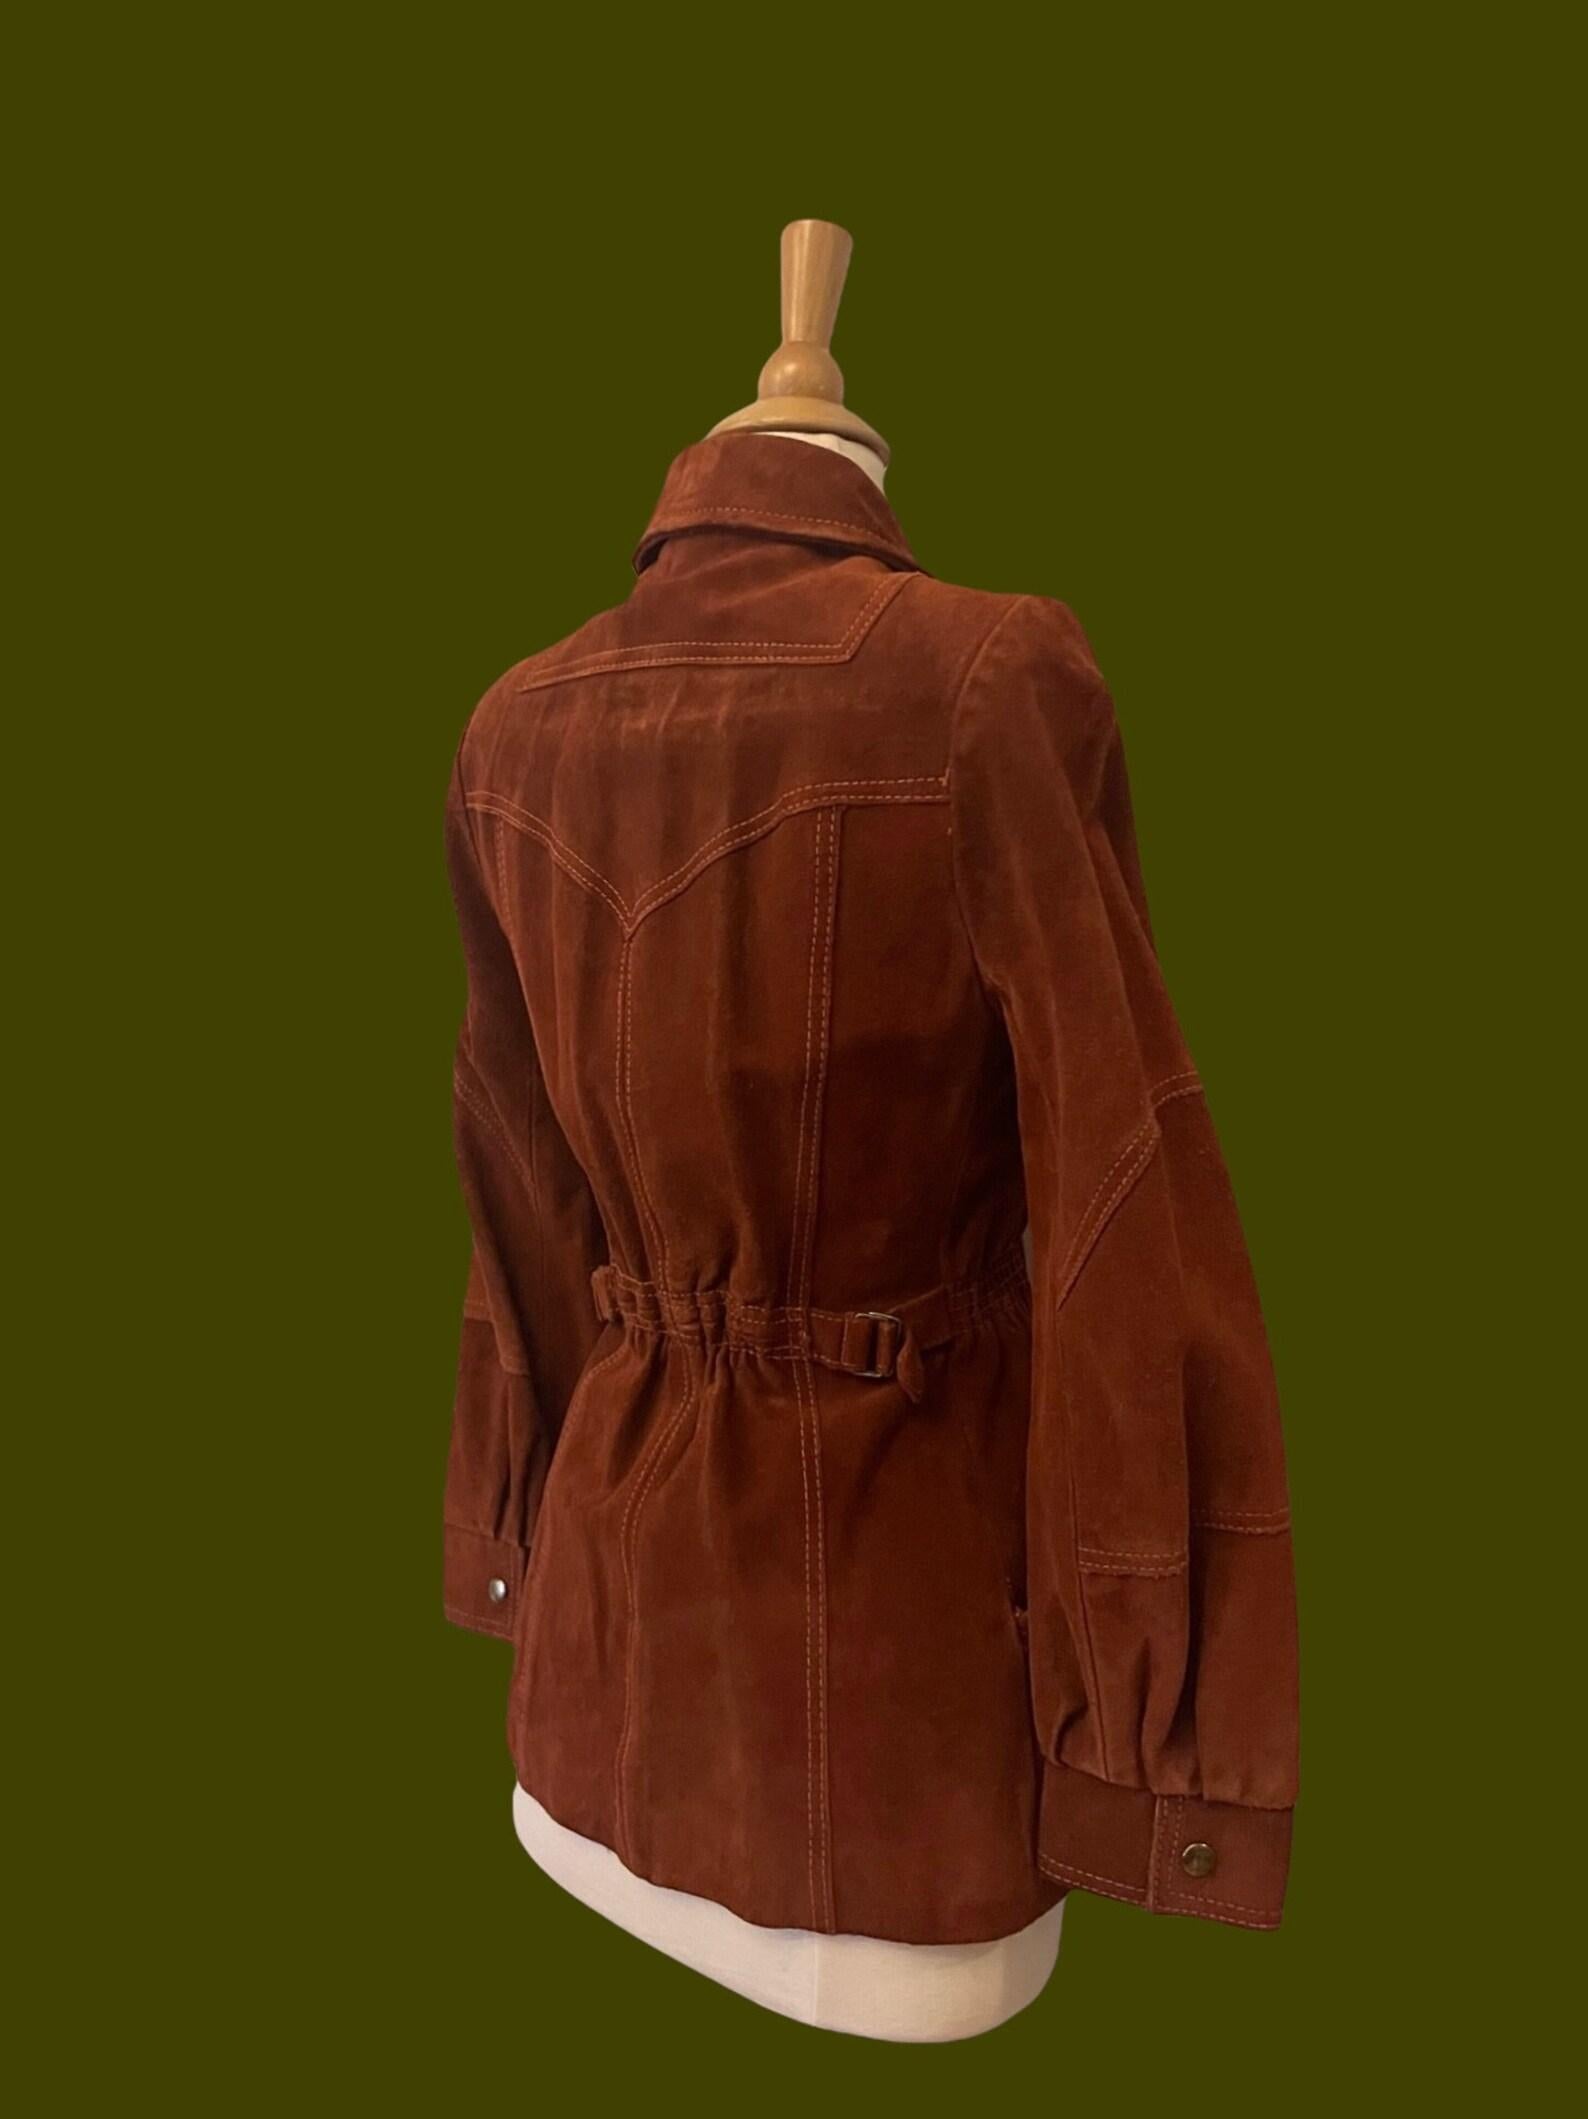 Rust Brown Suede Jacket, Circa 1970s For Sale 2